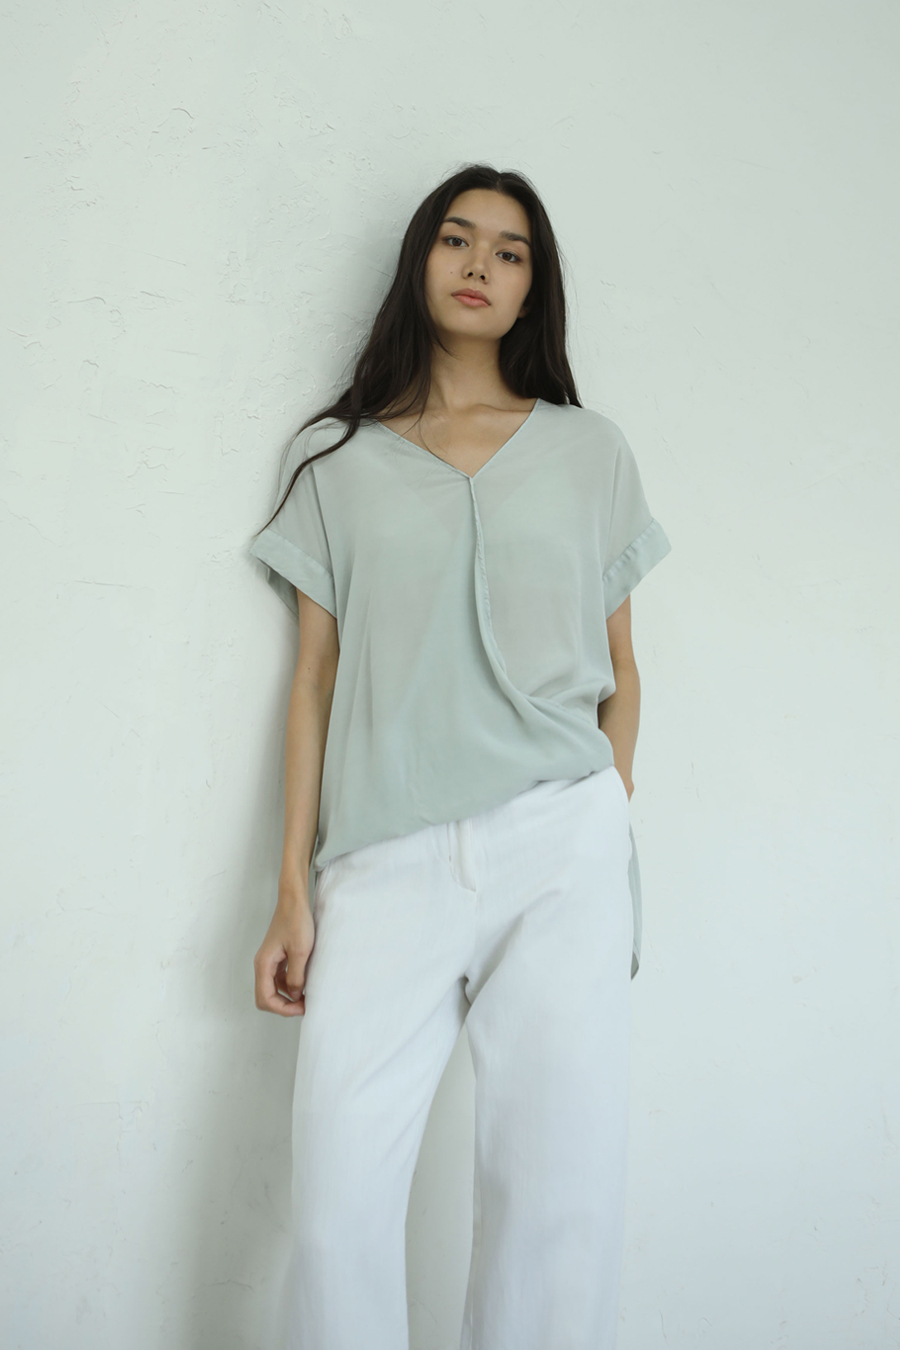 ropy dyeing blouse